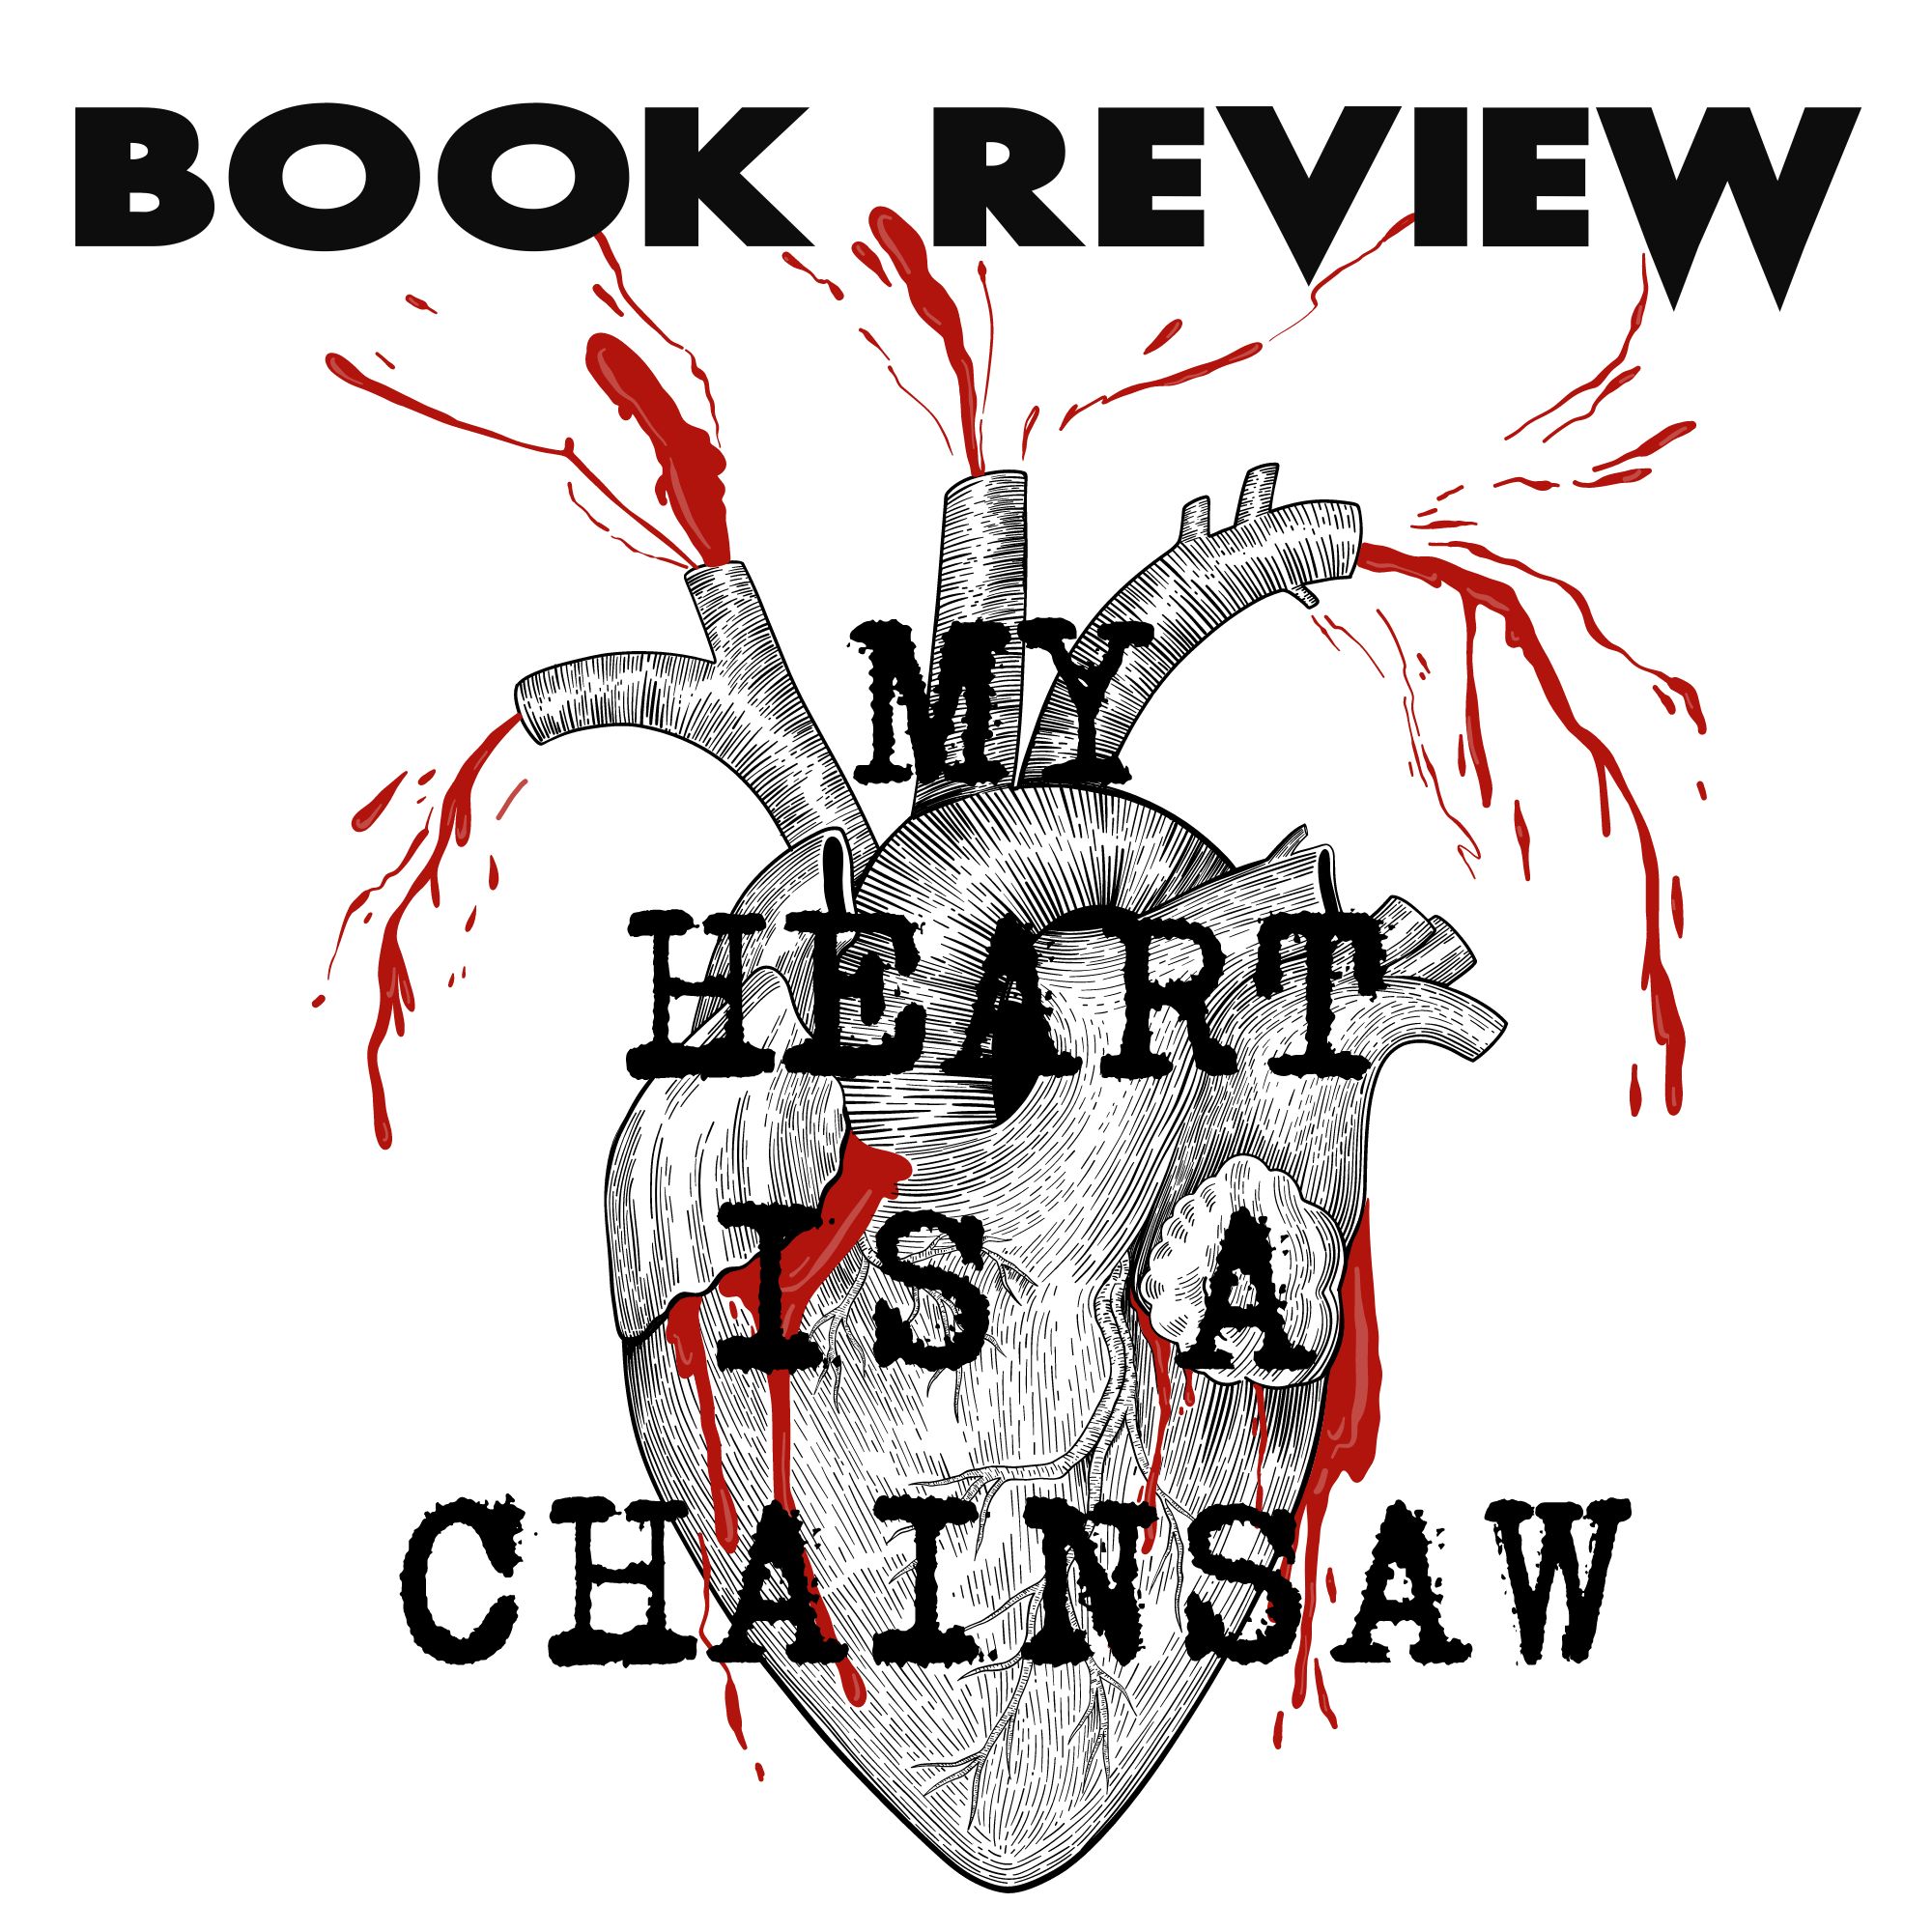 Good Reads Challenge Book Review: My Heart is a Chainsaw